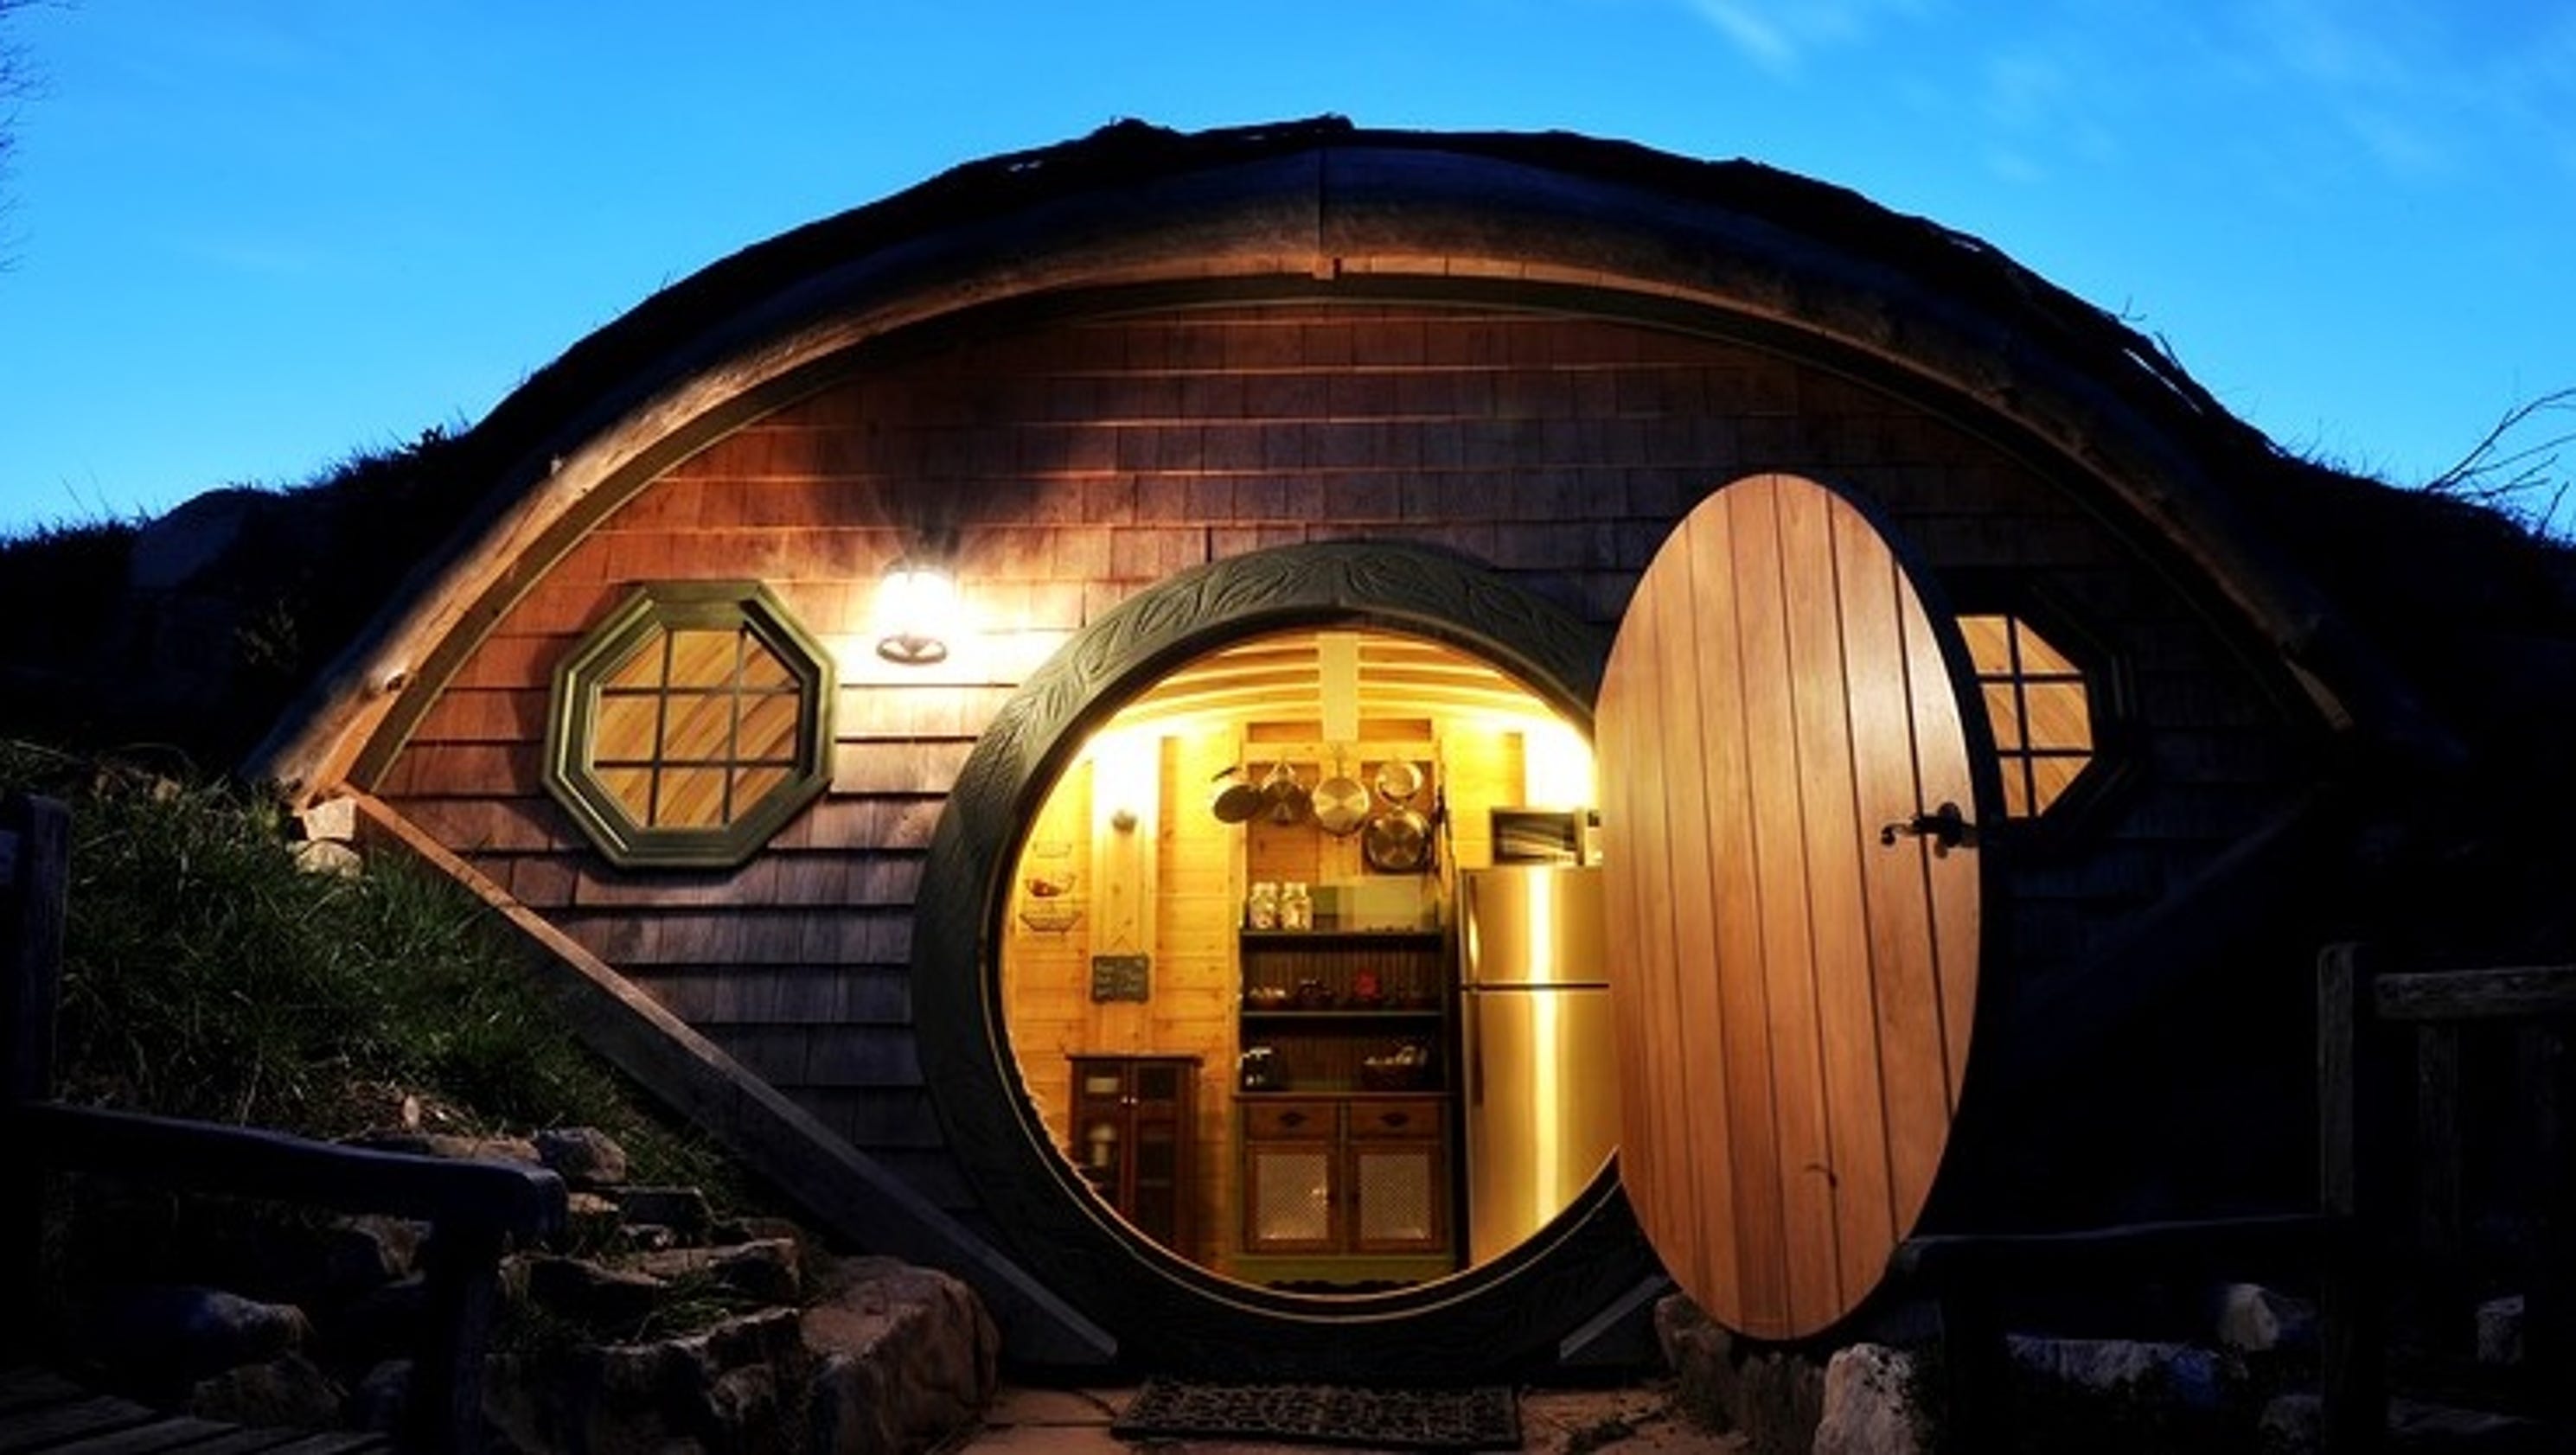 Glamping USA: Stay in a Hobbit hut, a covered wagon or a caboose